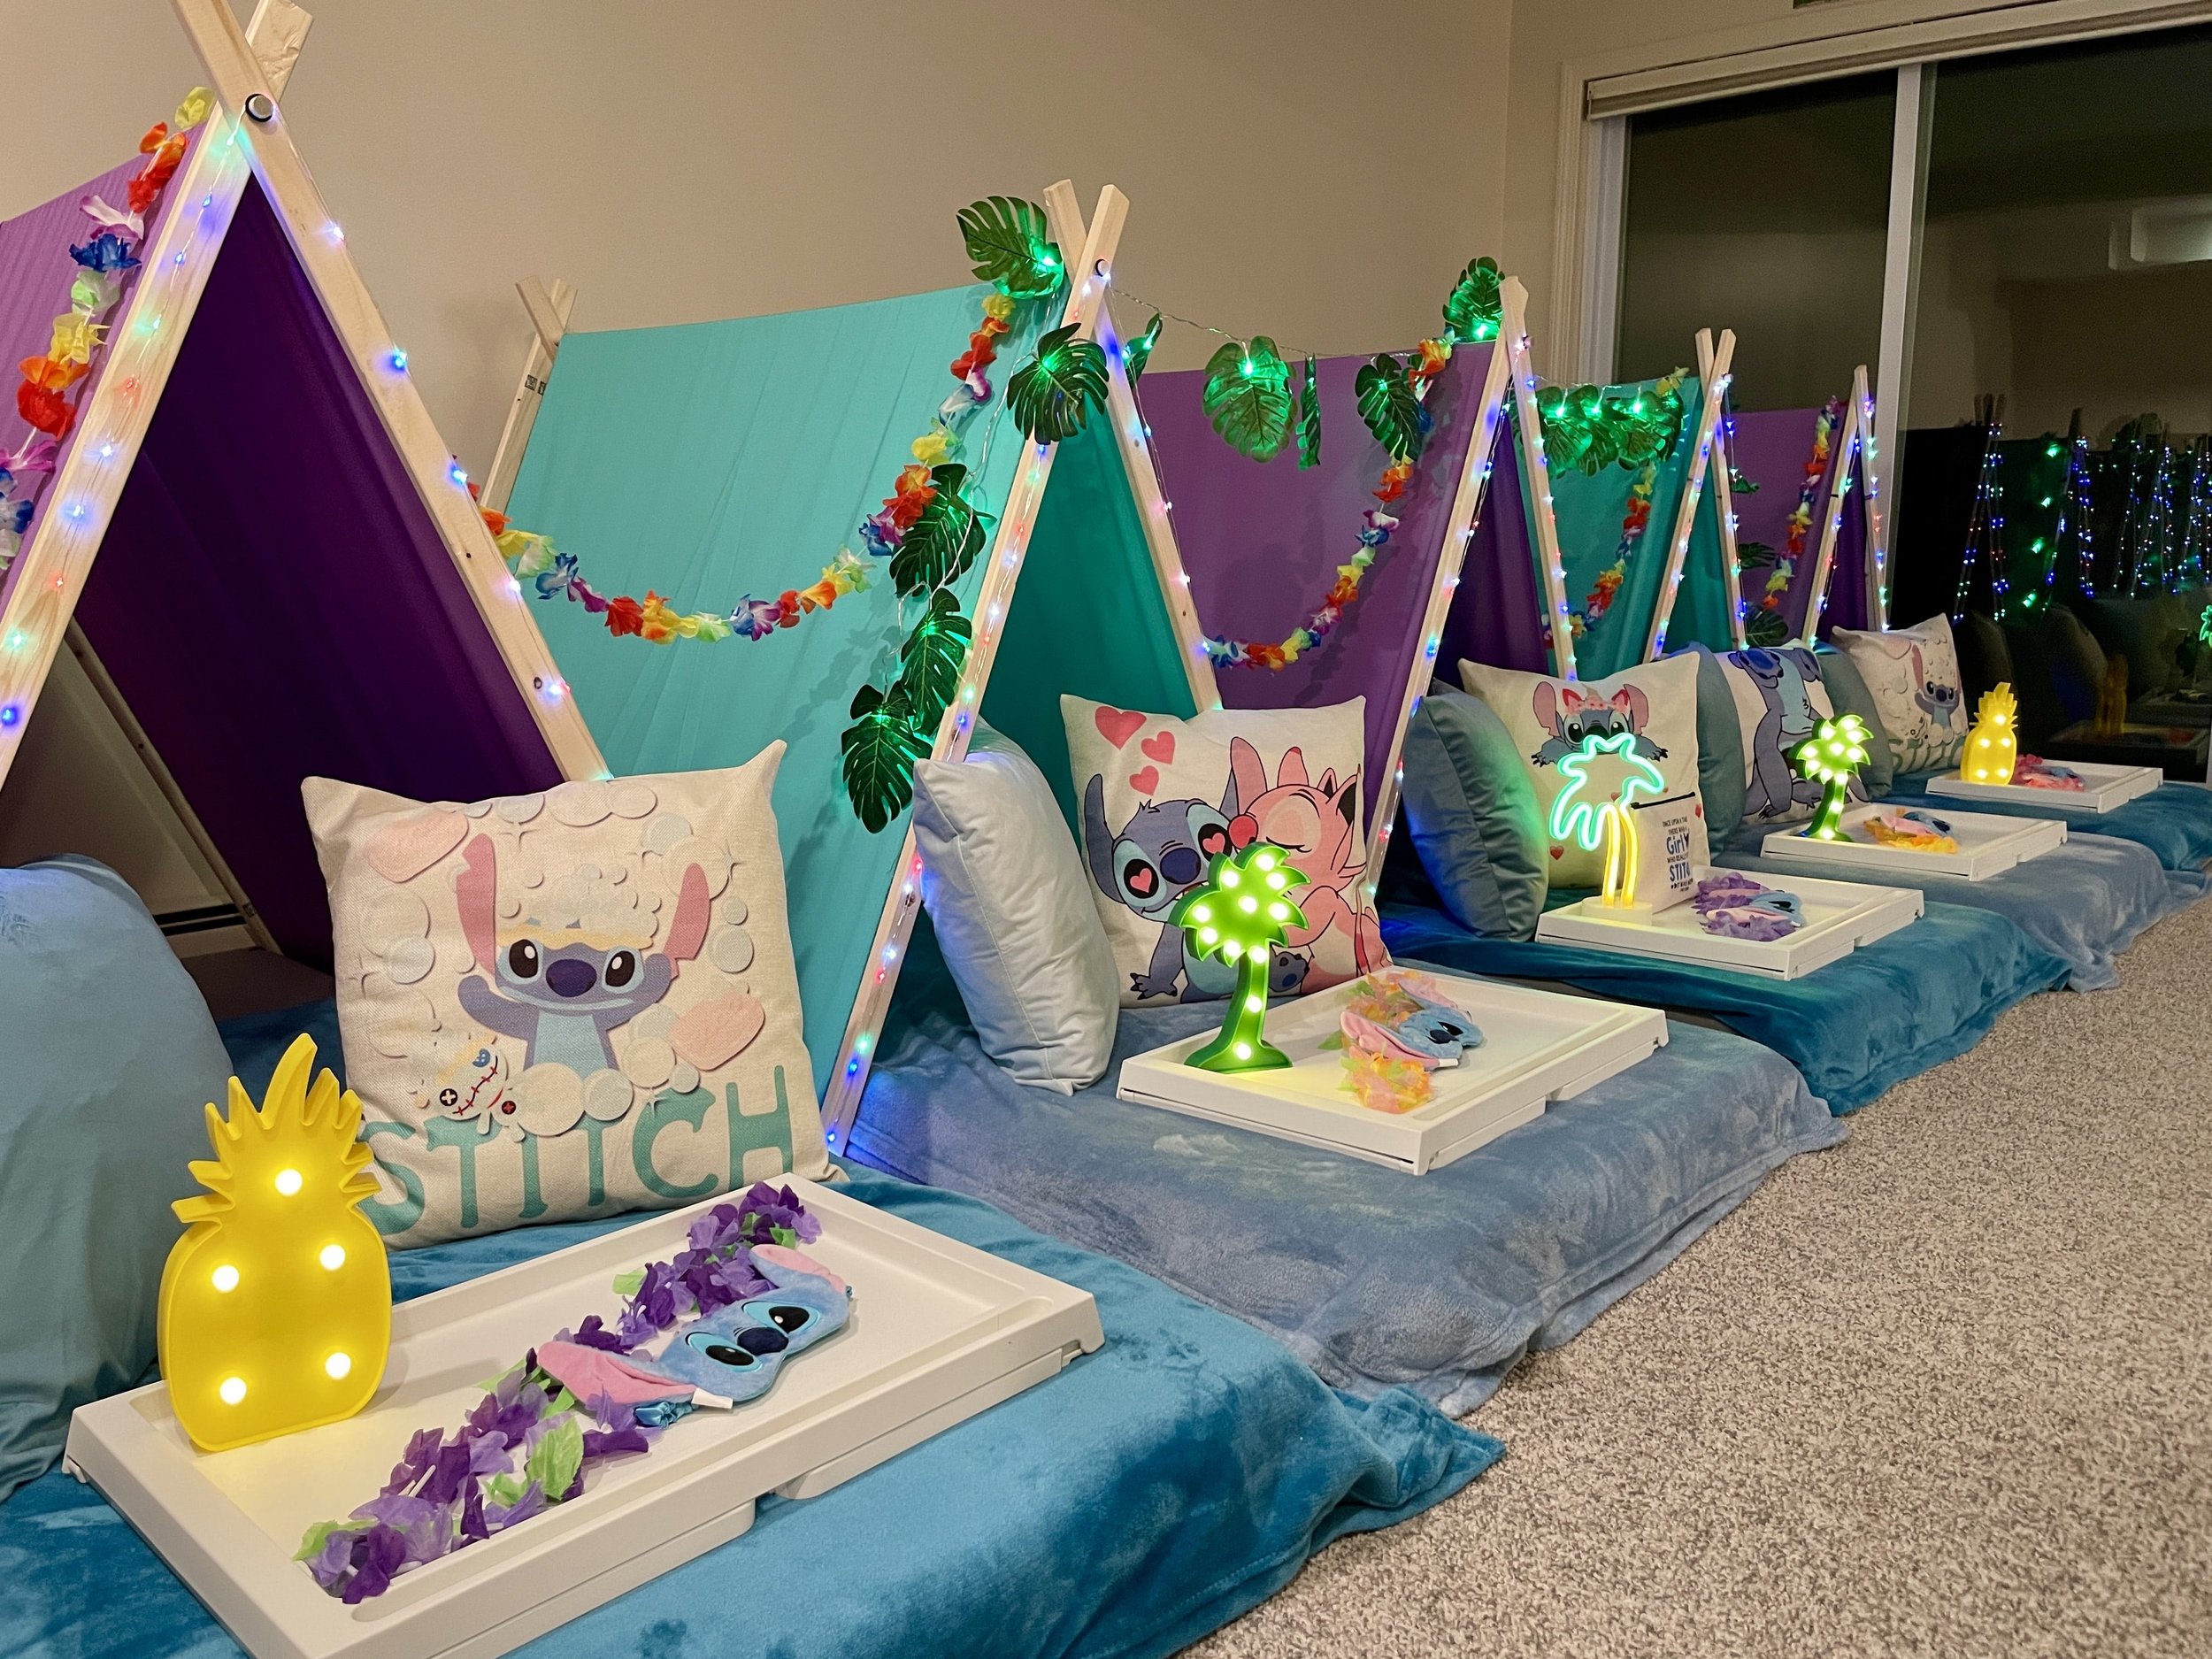 Nite Owl Party - Sleepover Party Tents in Massachusetts